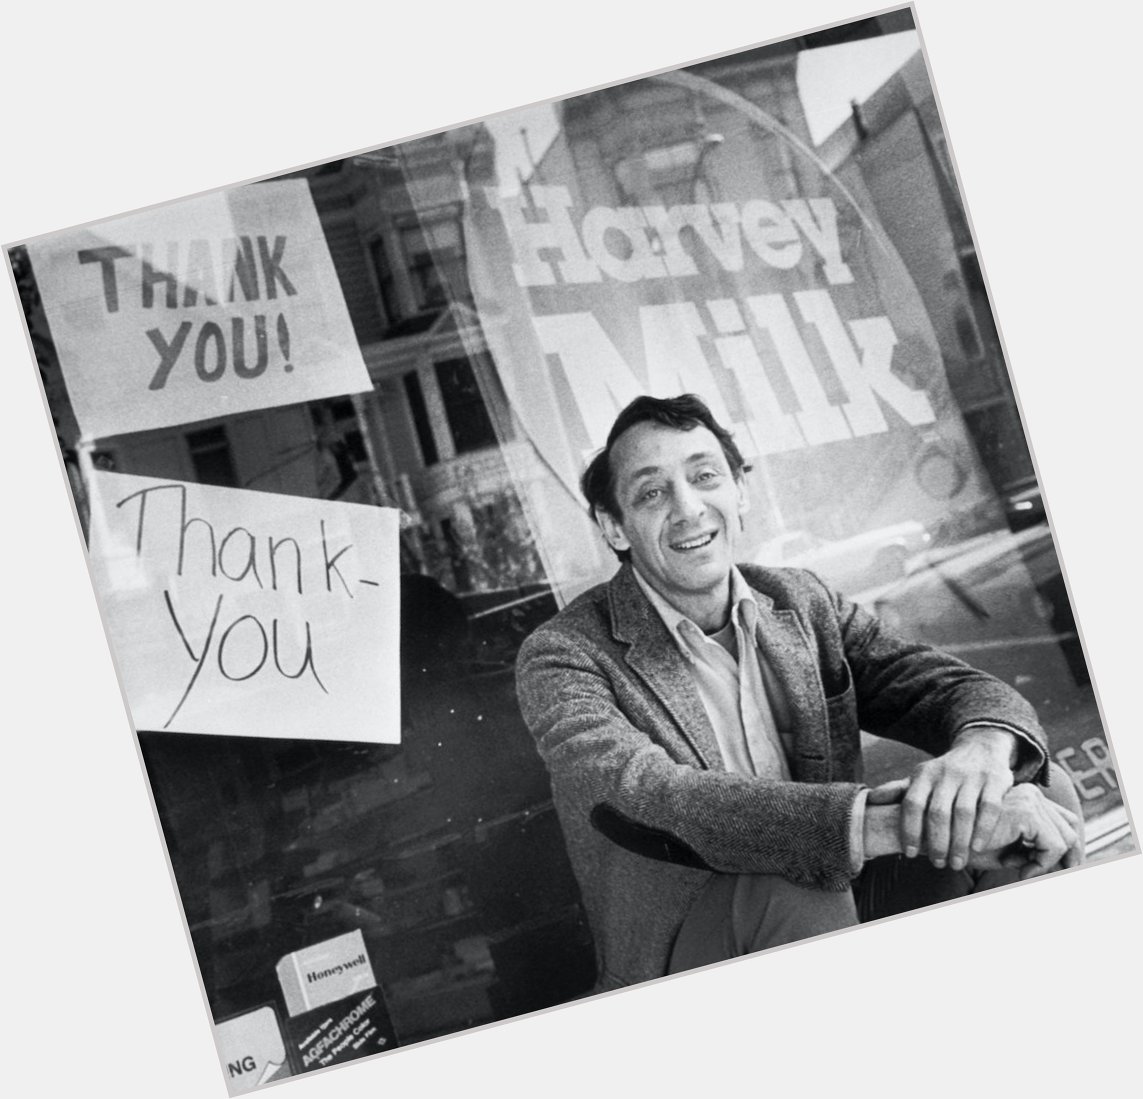 Happy birthday, Harvey Milk! 

Rest in power, rest in peace, sweet man. We thank you and we miss you. 